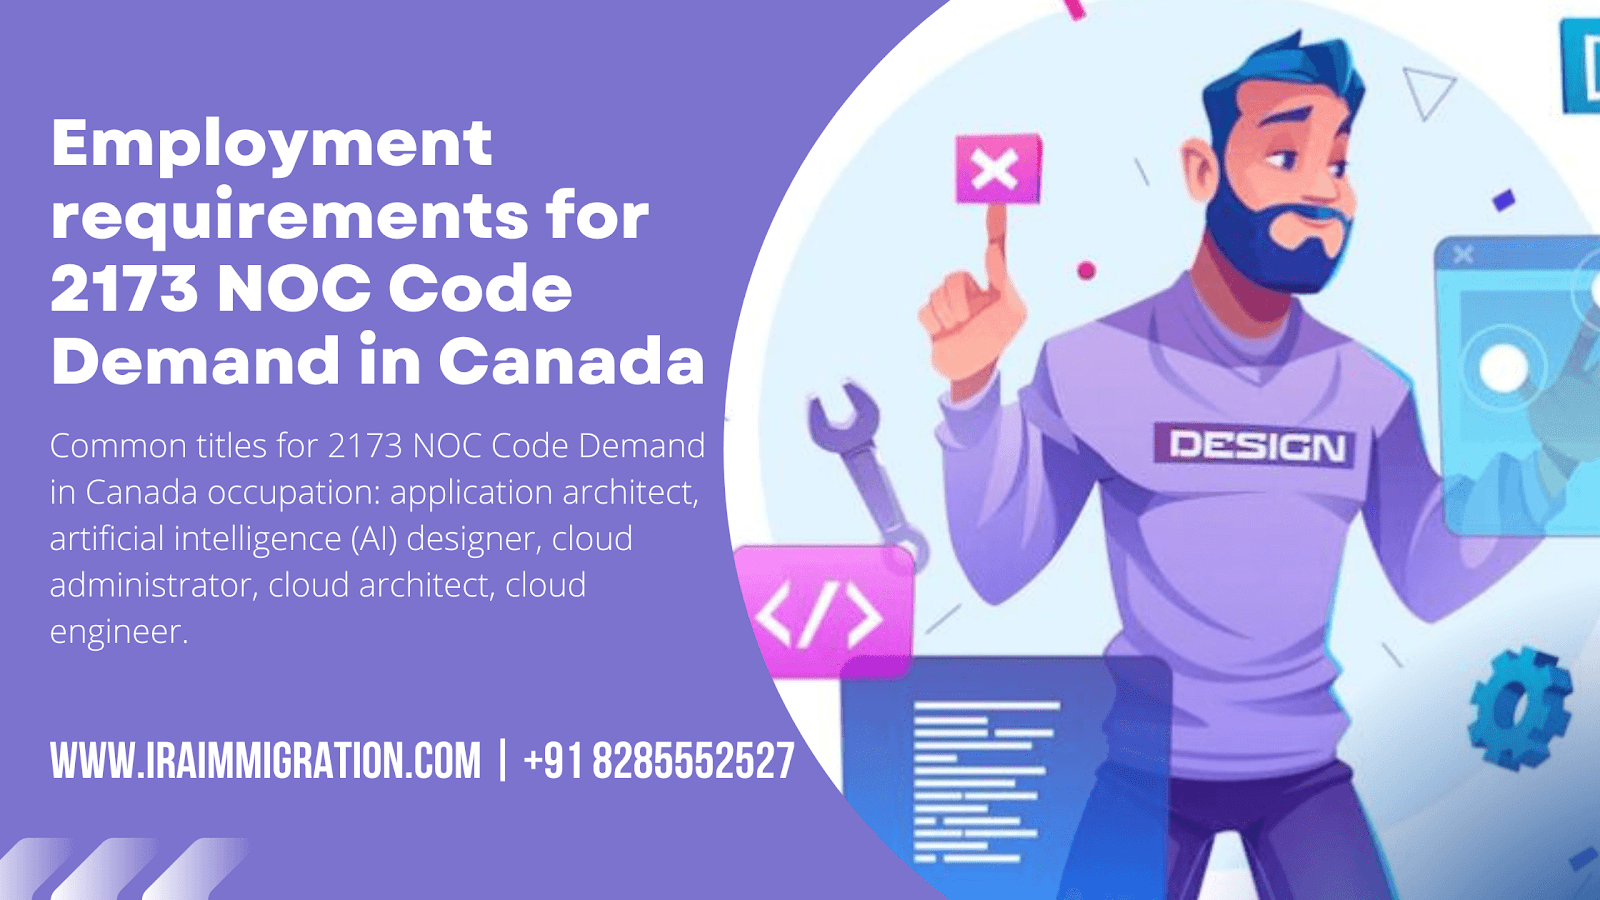 2173 NOC Code Demand in Canada and Employment requirements